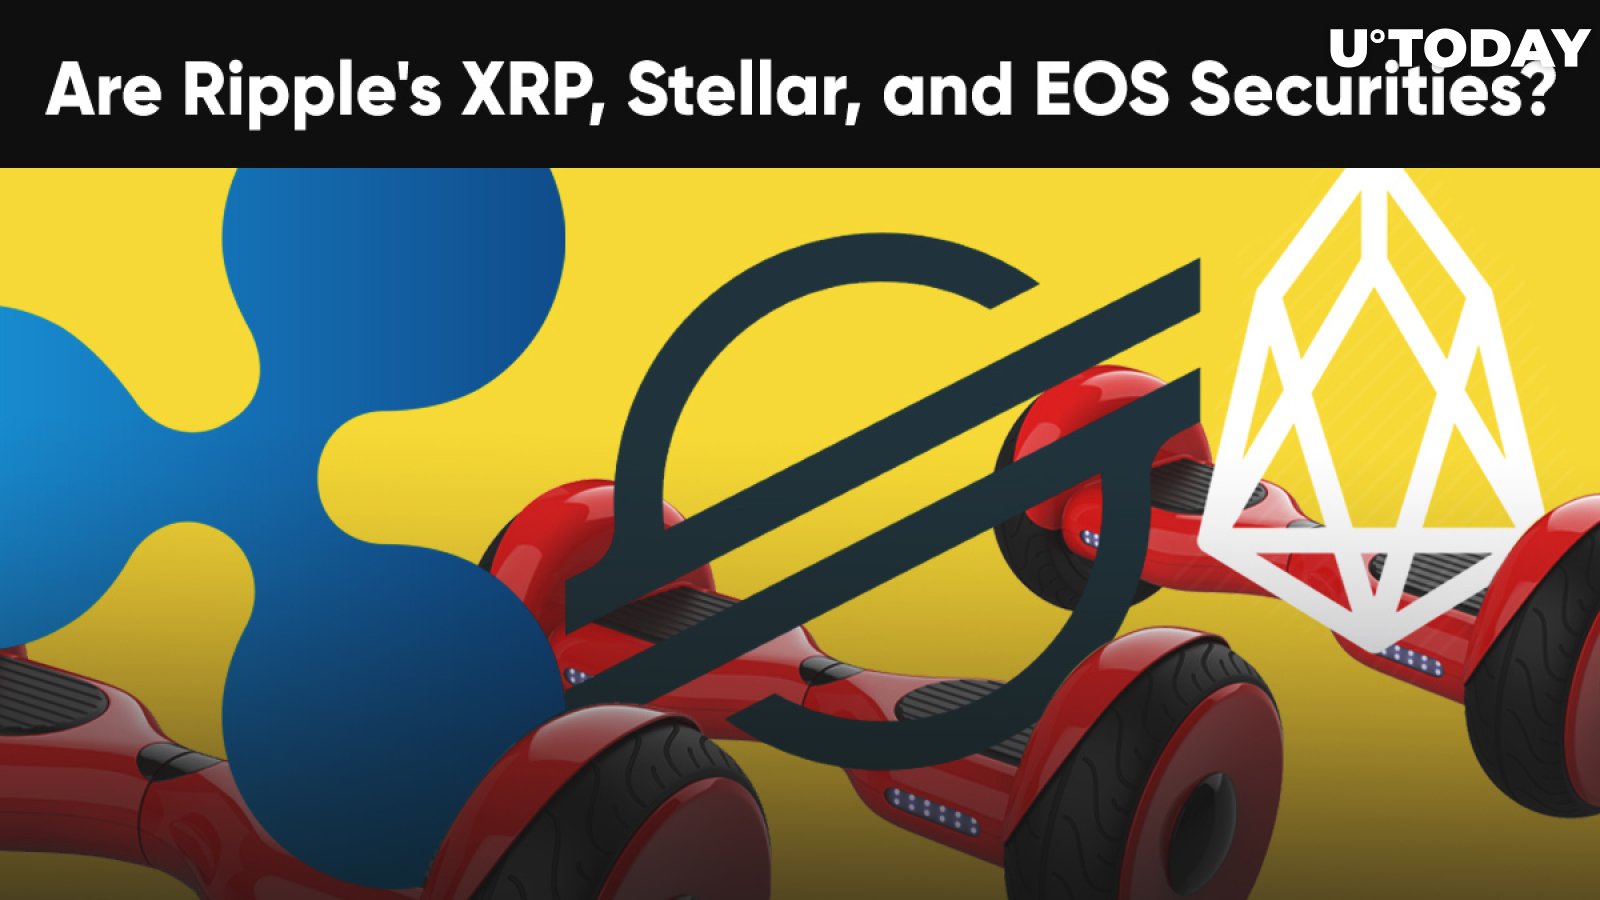 Are Ripple's XRP, Stellar, and EOS Securities? Top Crypto Exchanges Join Forces to Determine This